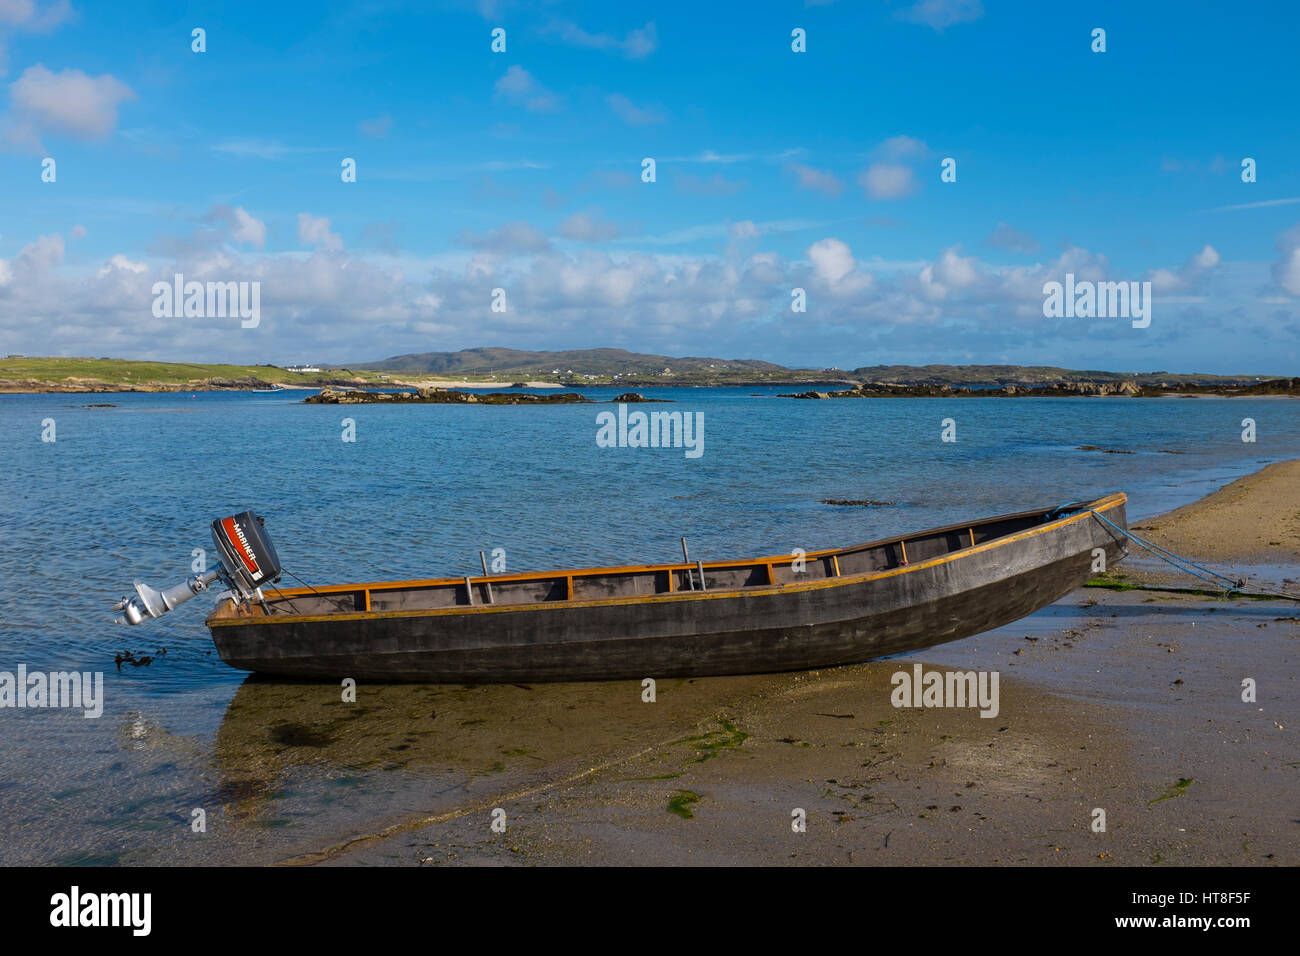 Traditional Curragh, canvas and wood boat on Omey Island at low tide, Connemara, Galway, Ireland. Omey is a tidal island - with a signposted route so  Stock Photo